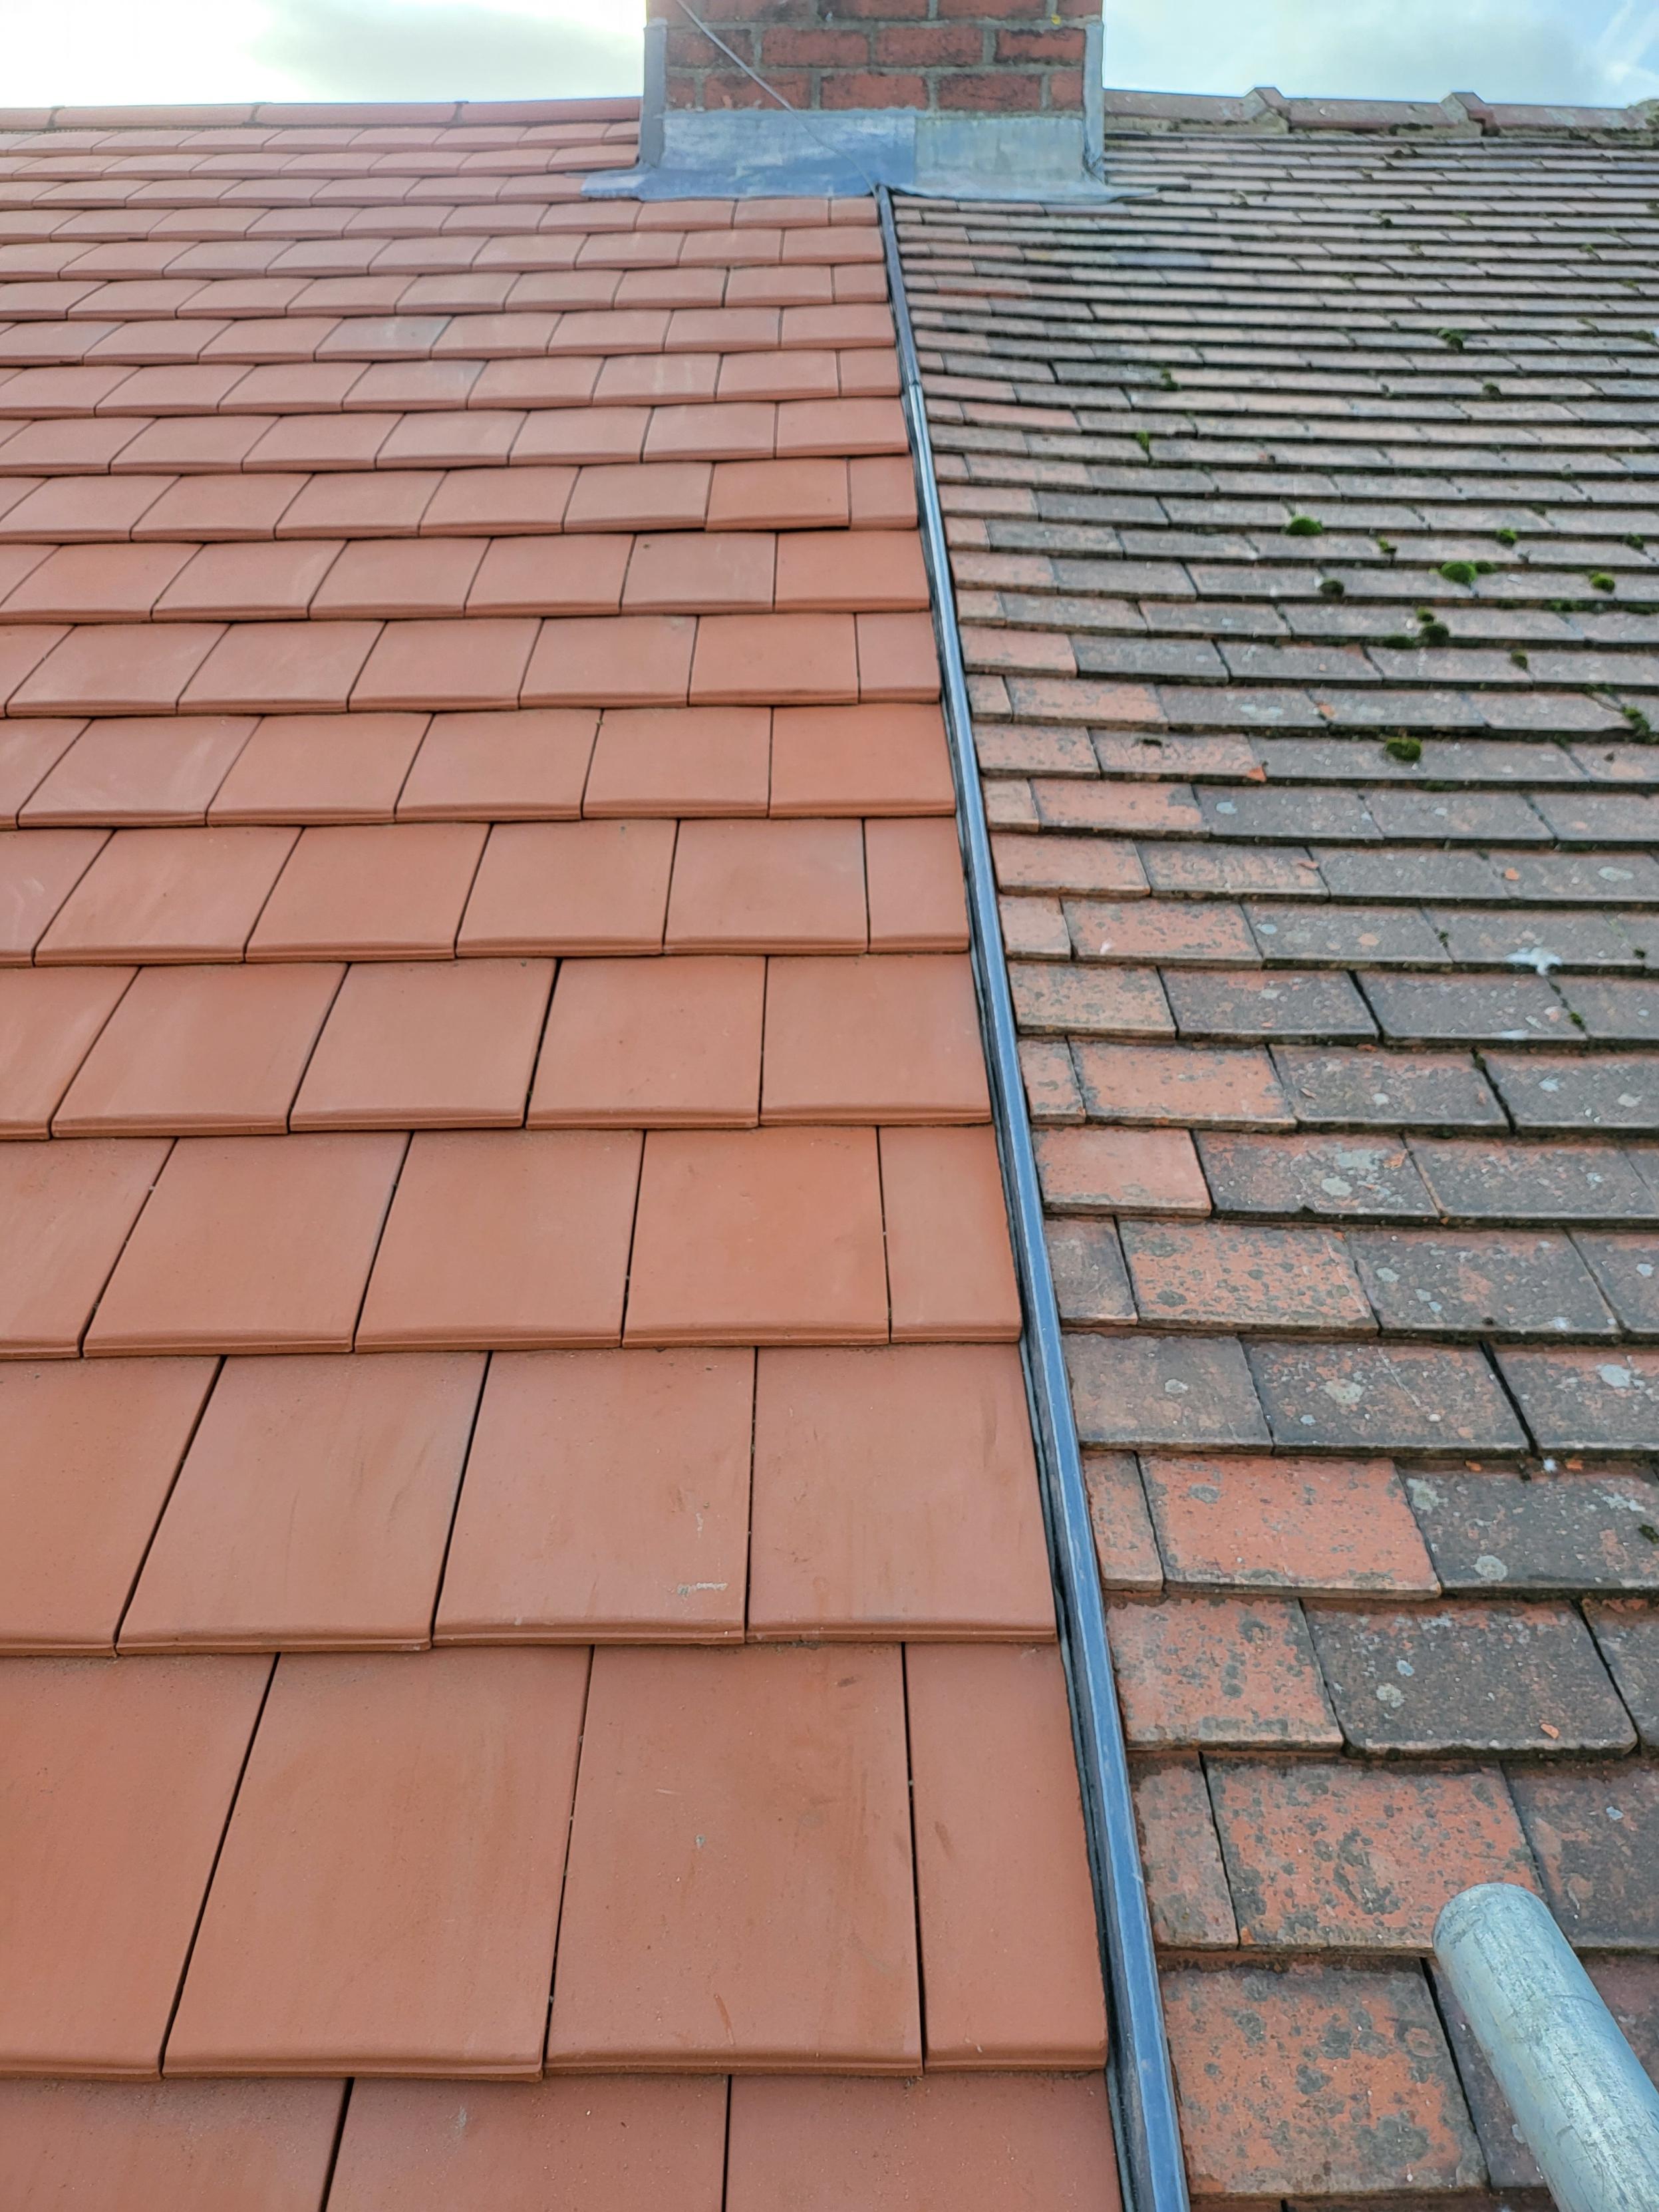 Skilled Roofing Contractors Serving Huddersfield, West Yorkshire